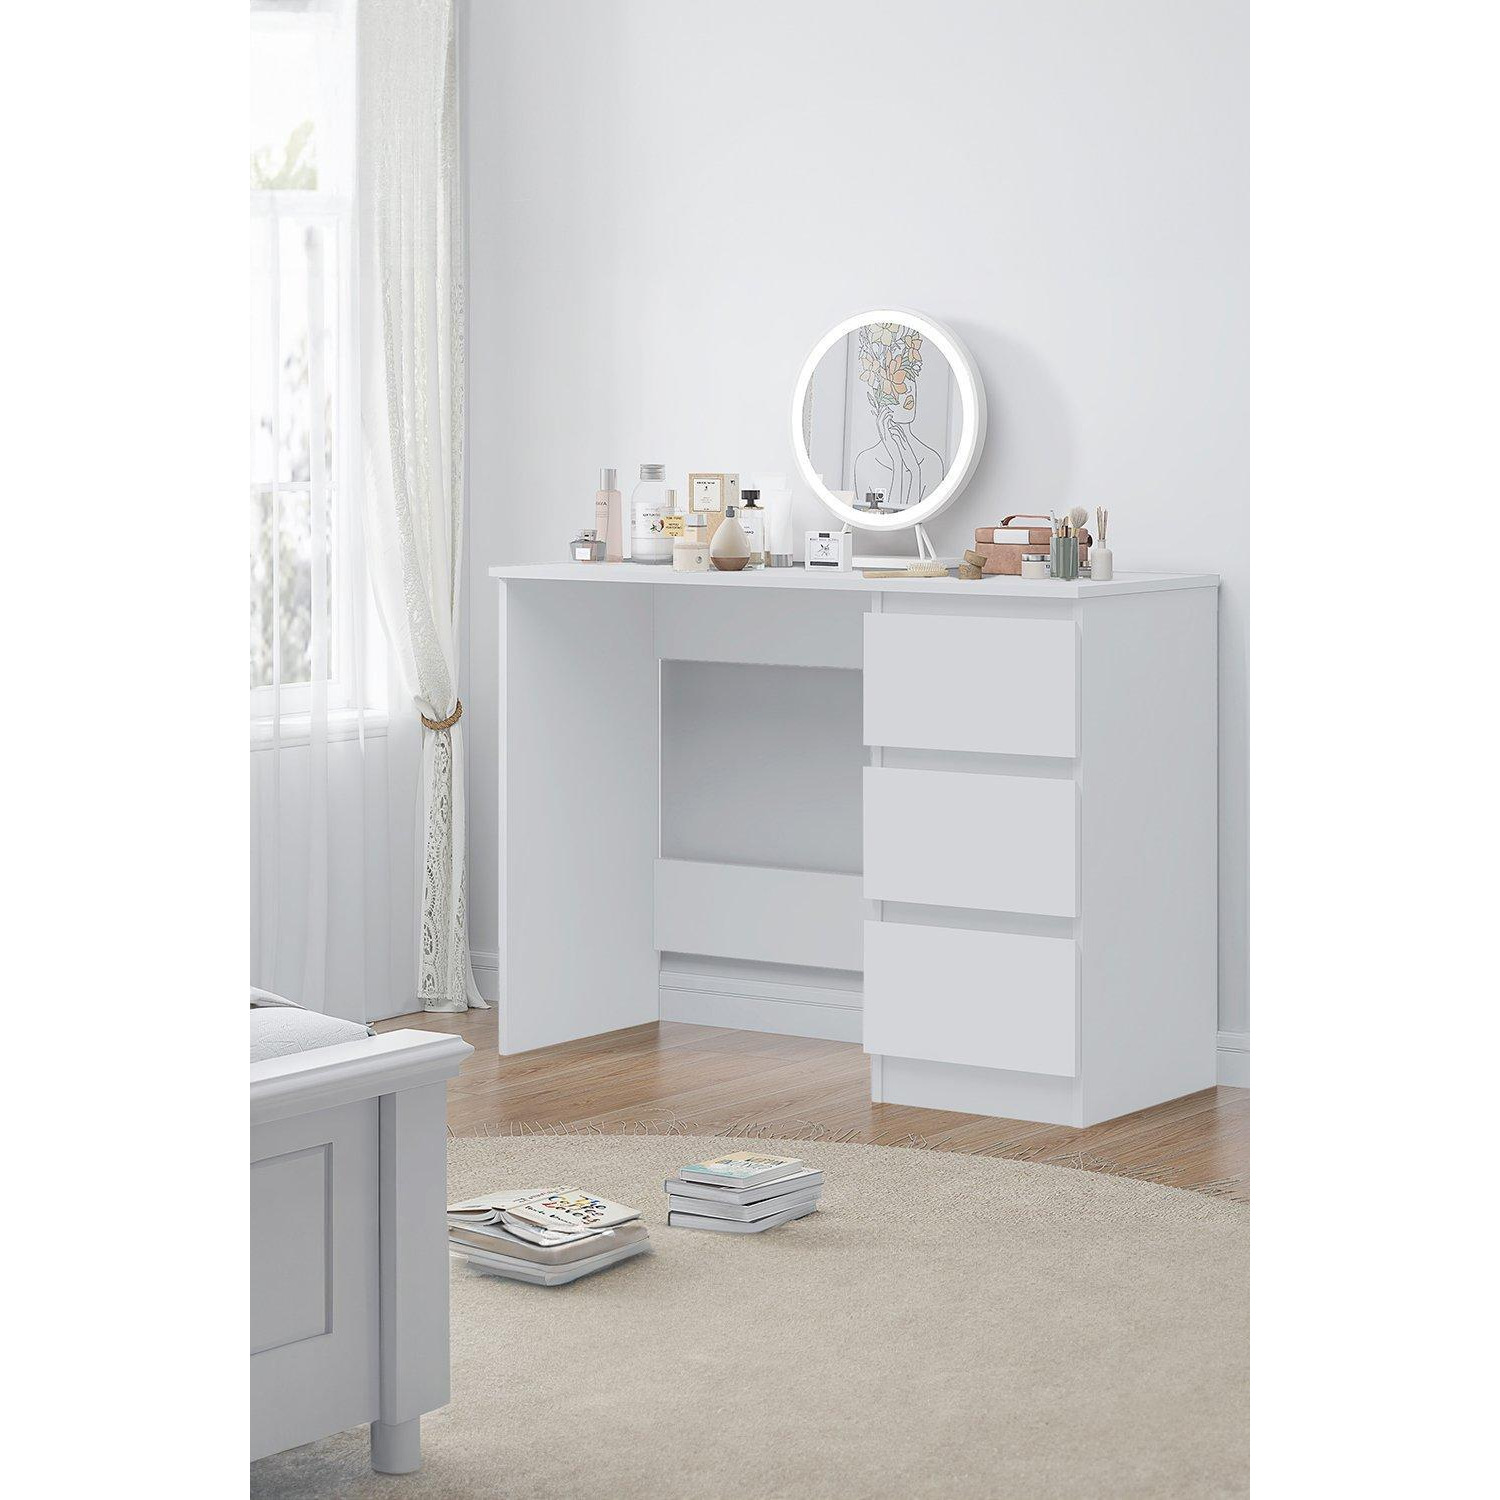 Matt Dressing Table Desk With 3 Large Drawers - image 1